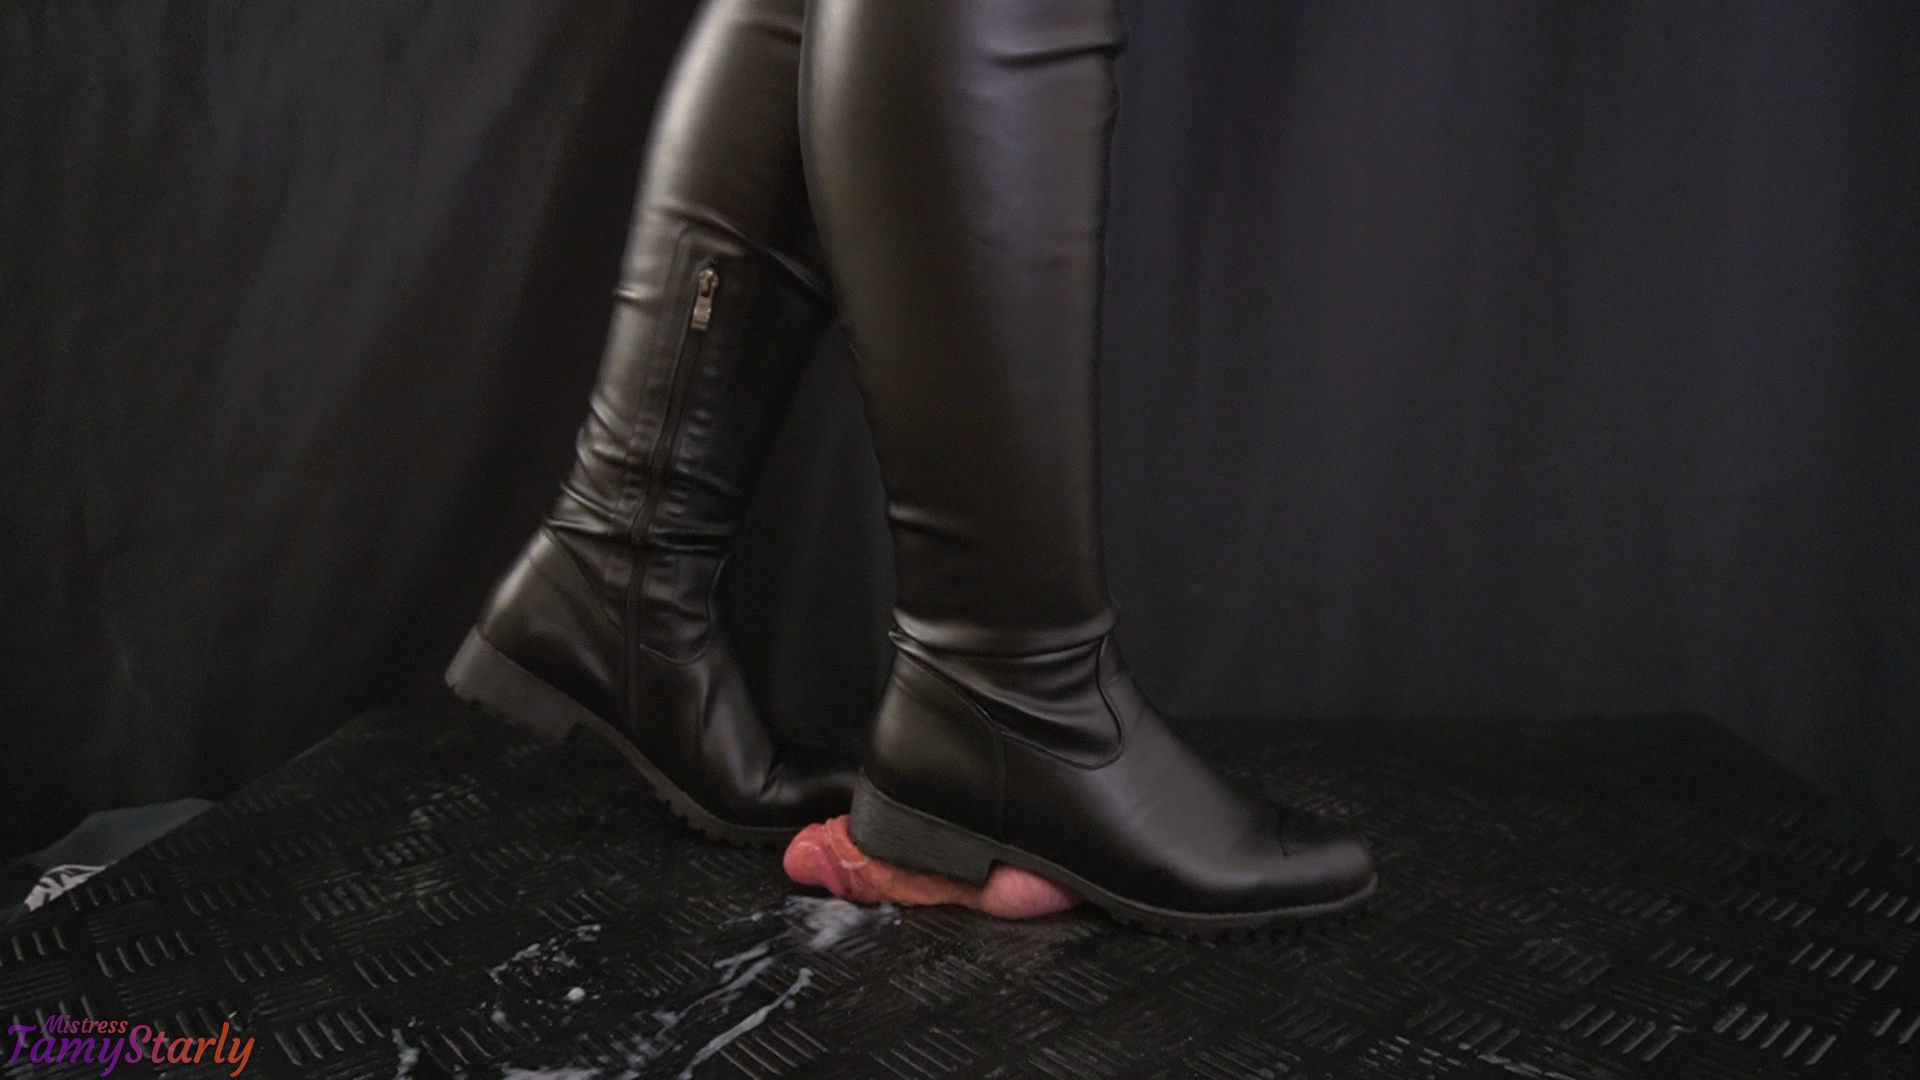 Heavy Trampling Your Dick in Thigh High Leather Boots #3